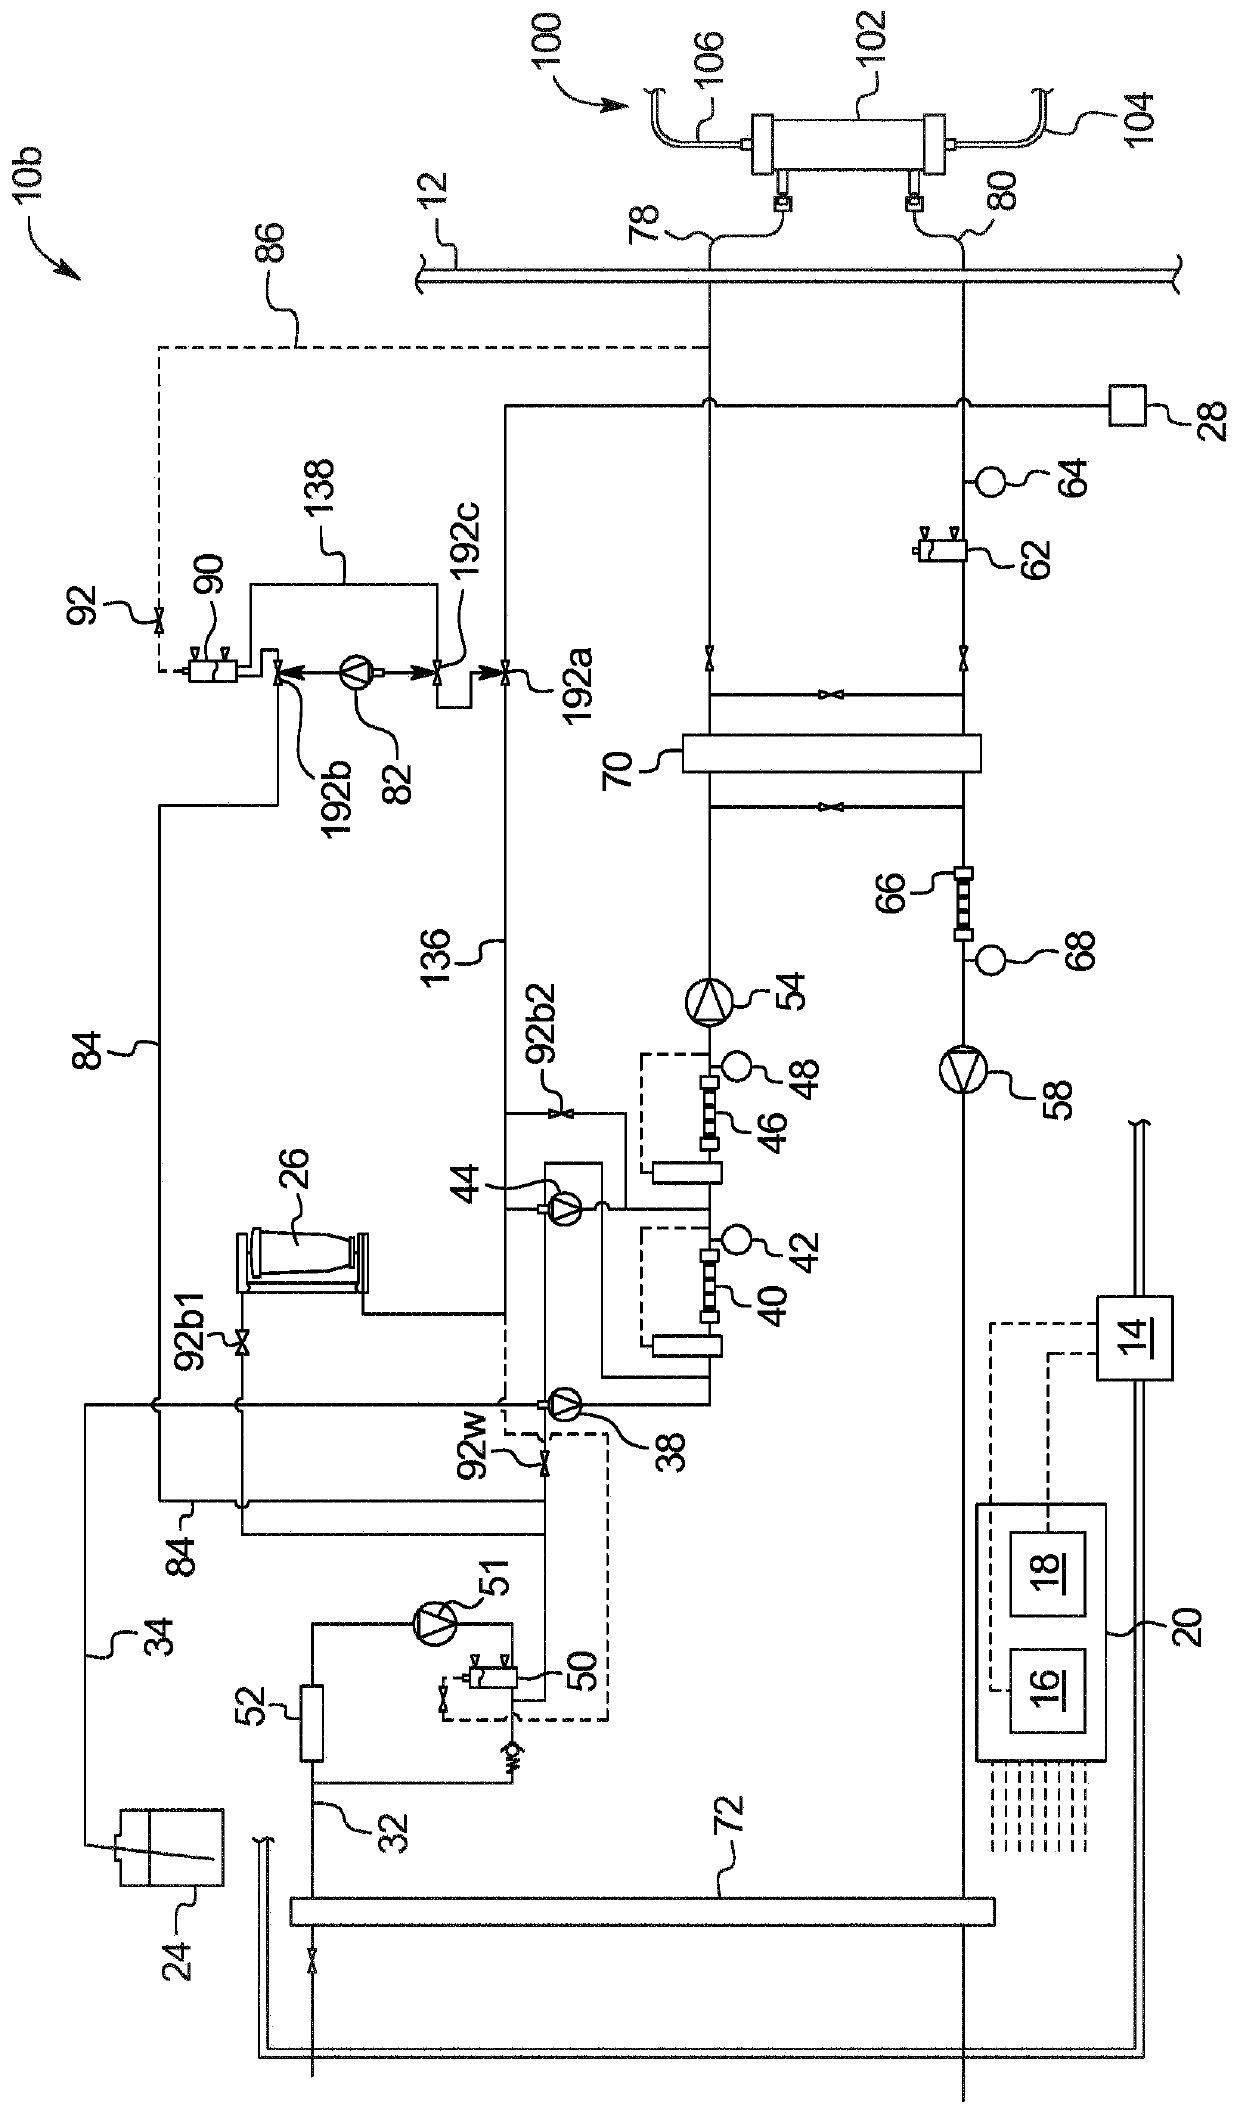 Dialysis system having carbon dioxide generation and prime